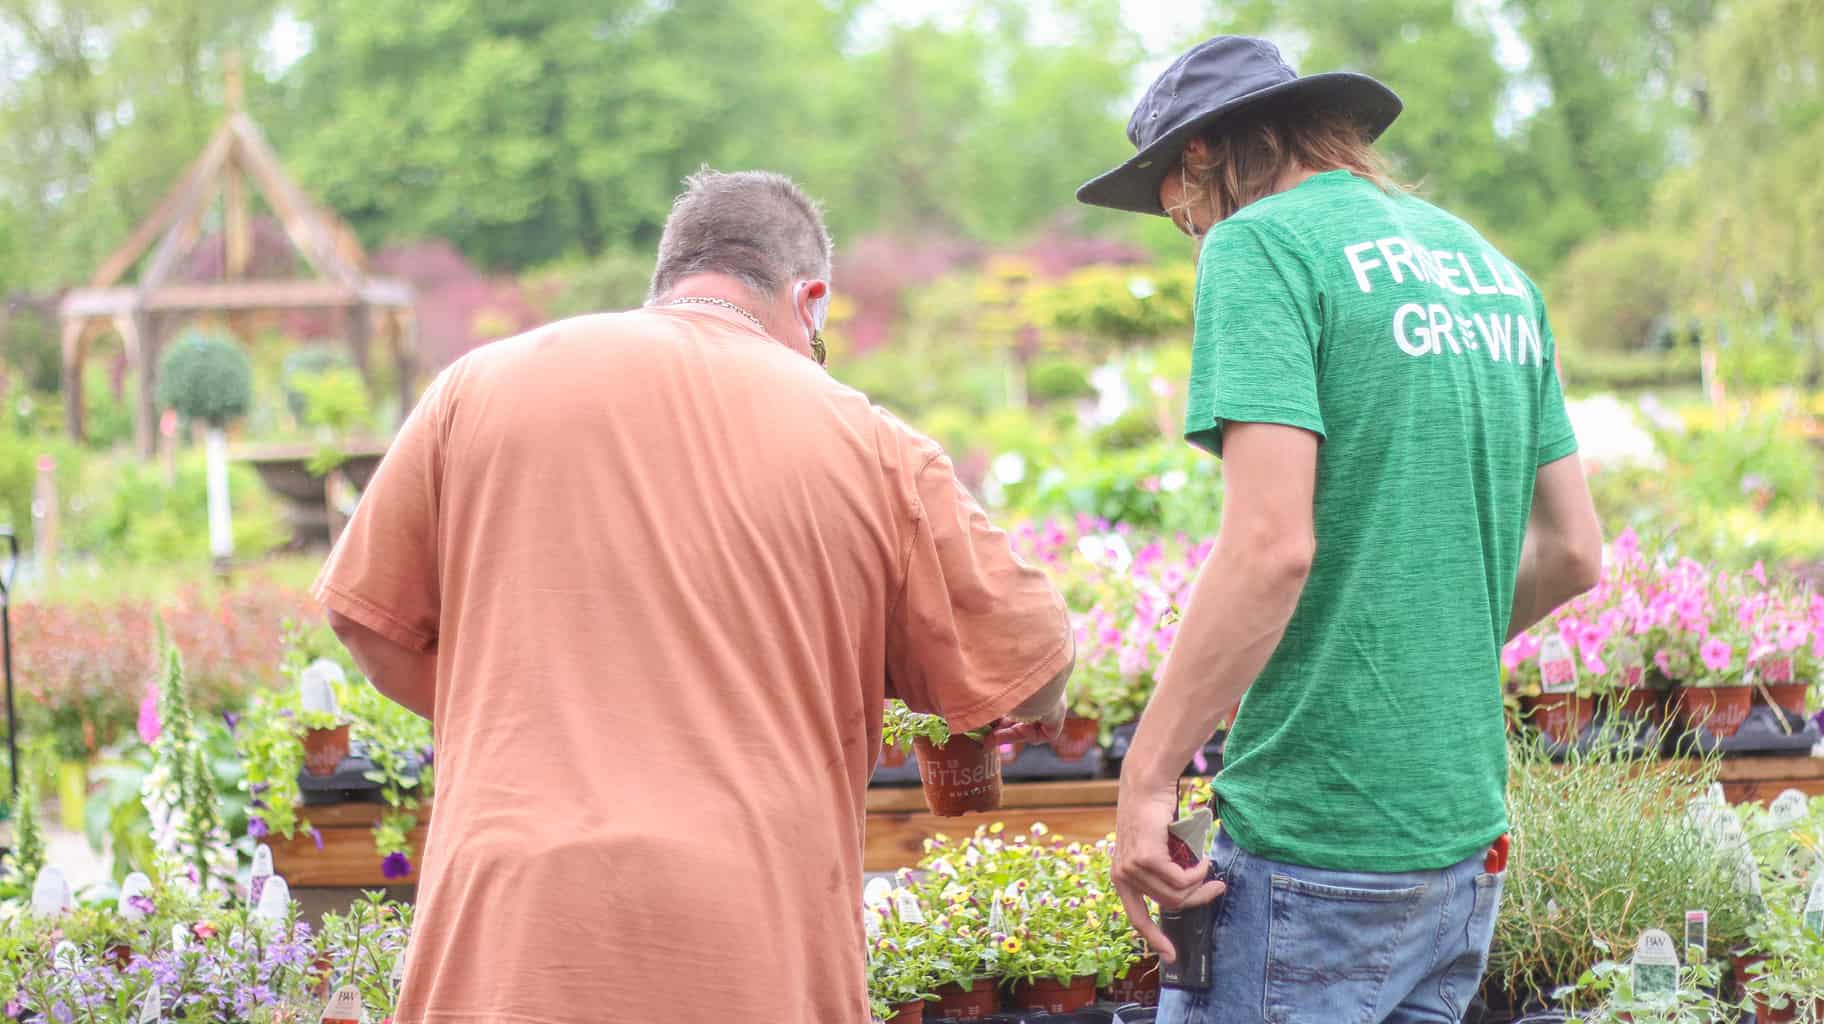 Frisella Plant Specialists helping our guests pick the perfect plants